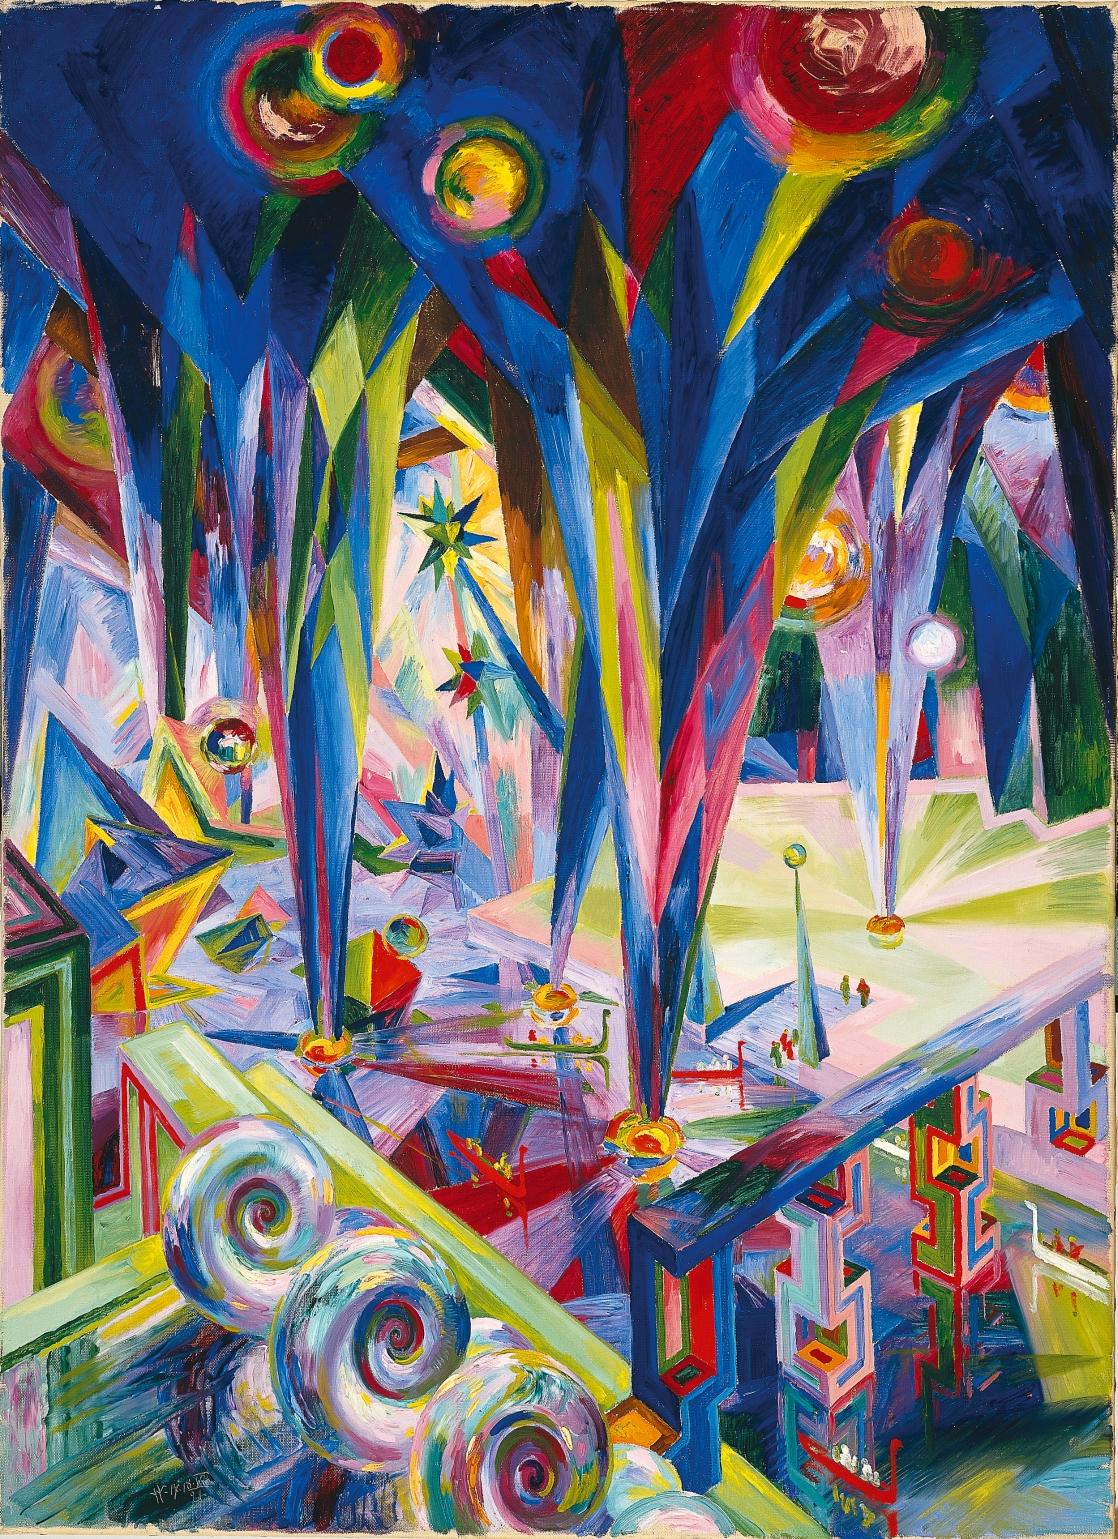 Cathedral Interior is a Futurist oil on canvas painting created by Wenzel Hablik in 1921